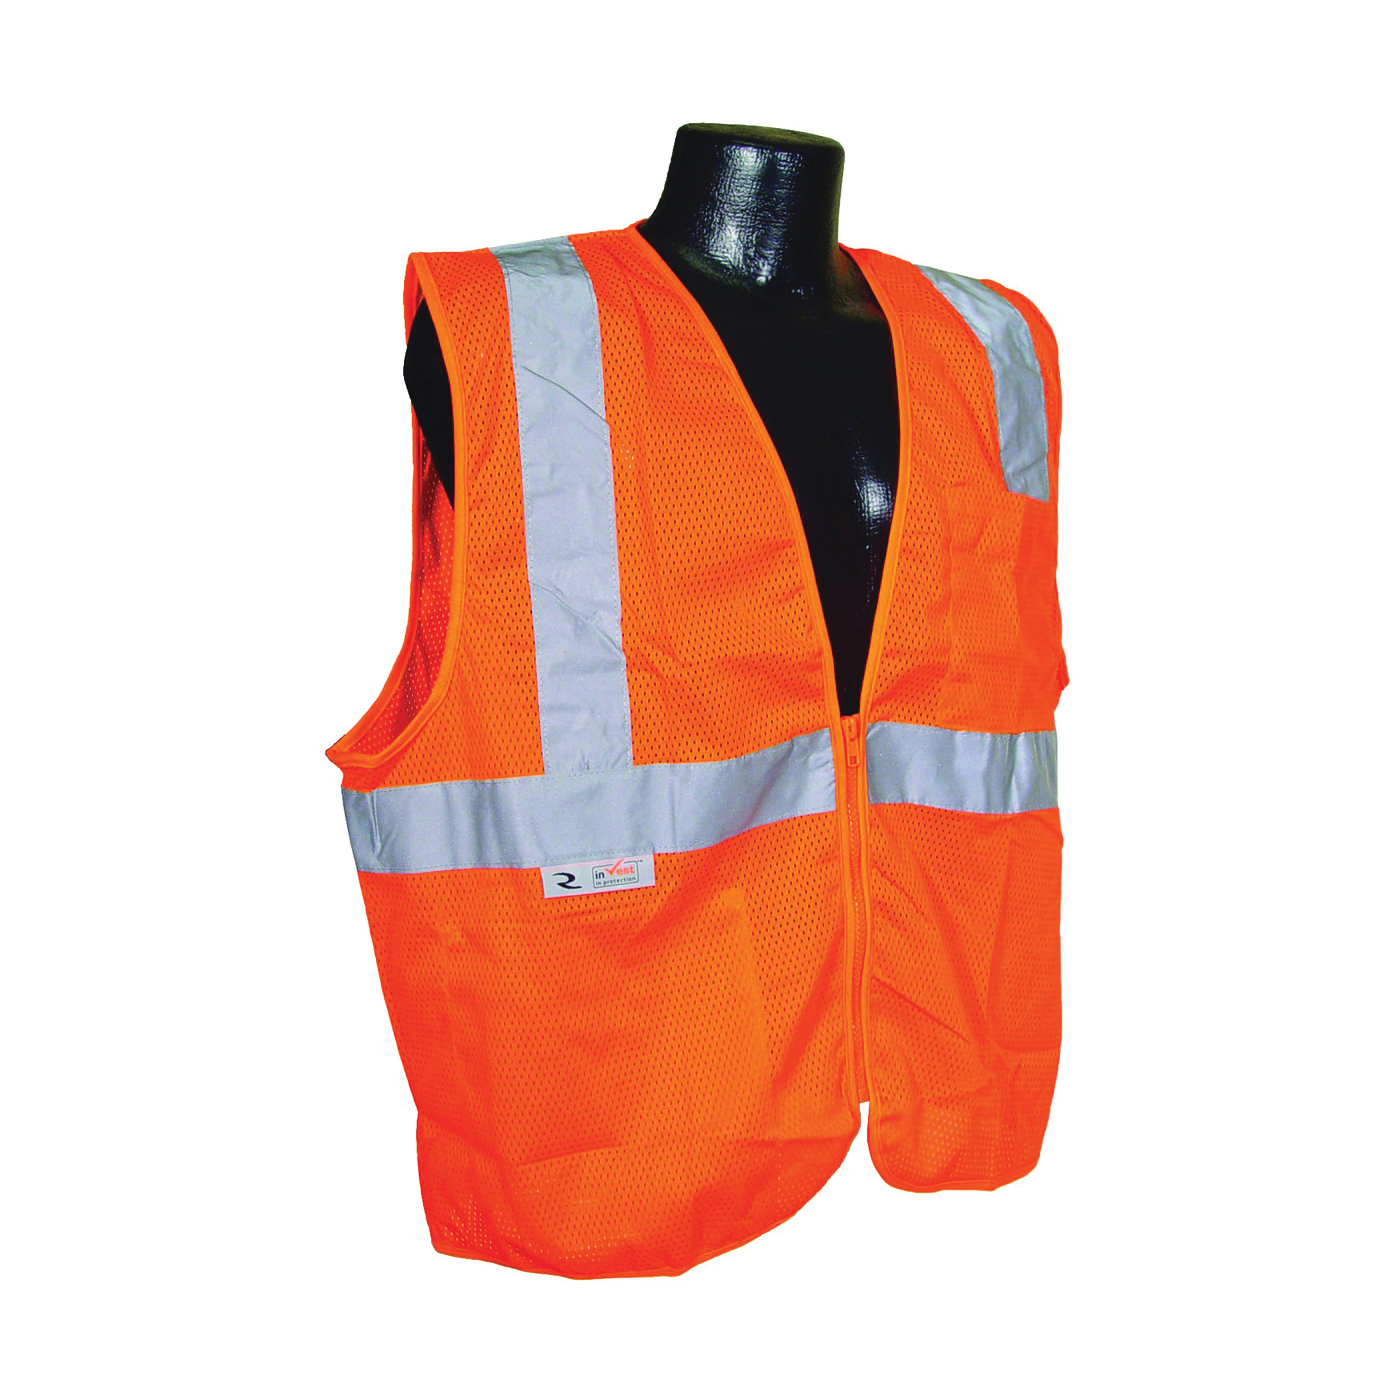 SV2ZOM-XL Economical Safety Vest, XL, Unisex, Fits to Chest Size: 28 in, Polyester, Orange/Silver